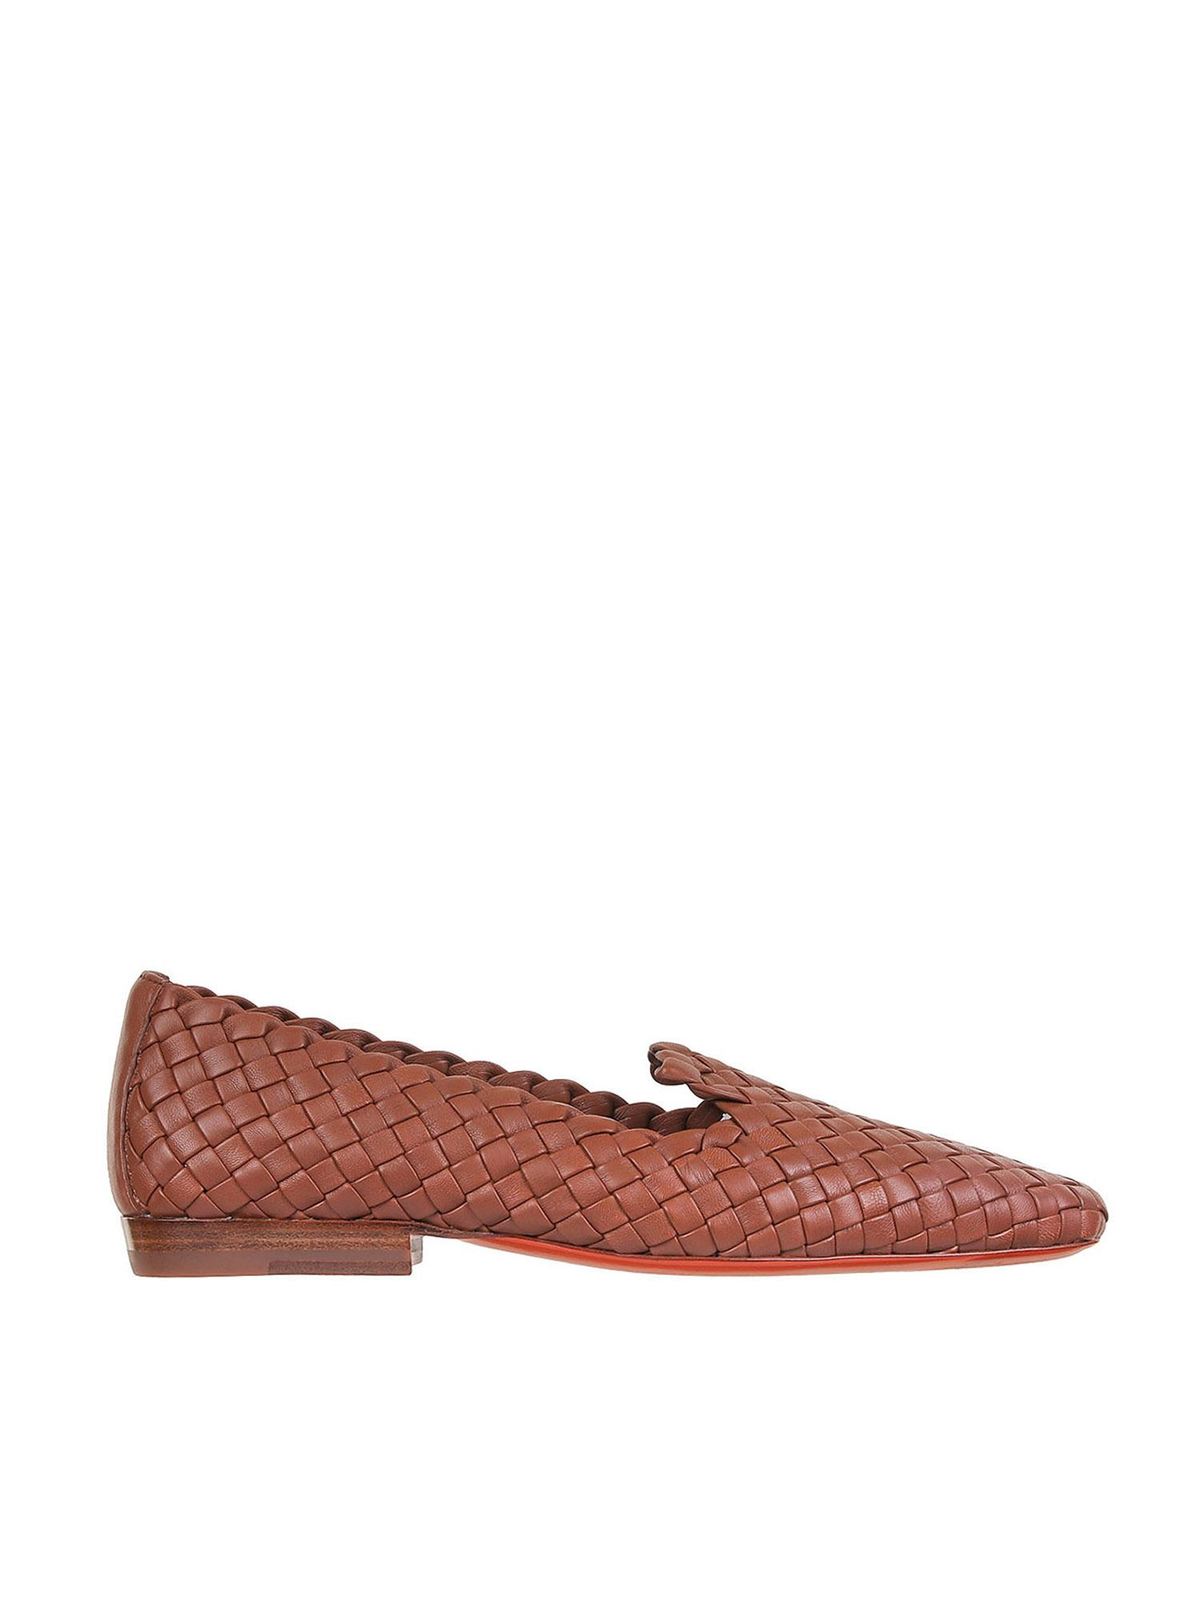 SANTONI WOVEN LOAFERS IN BROWN